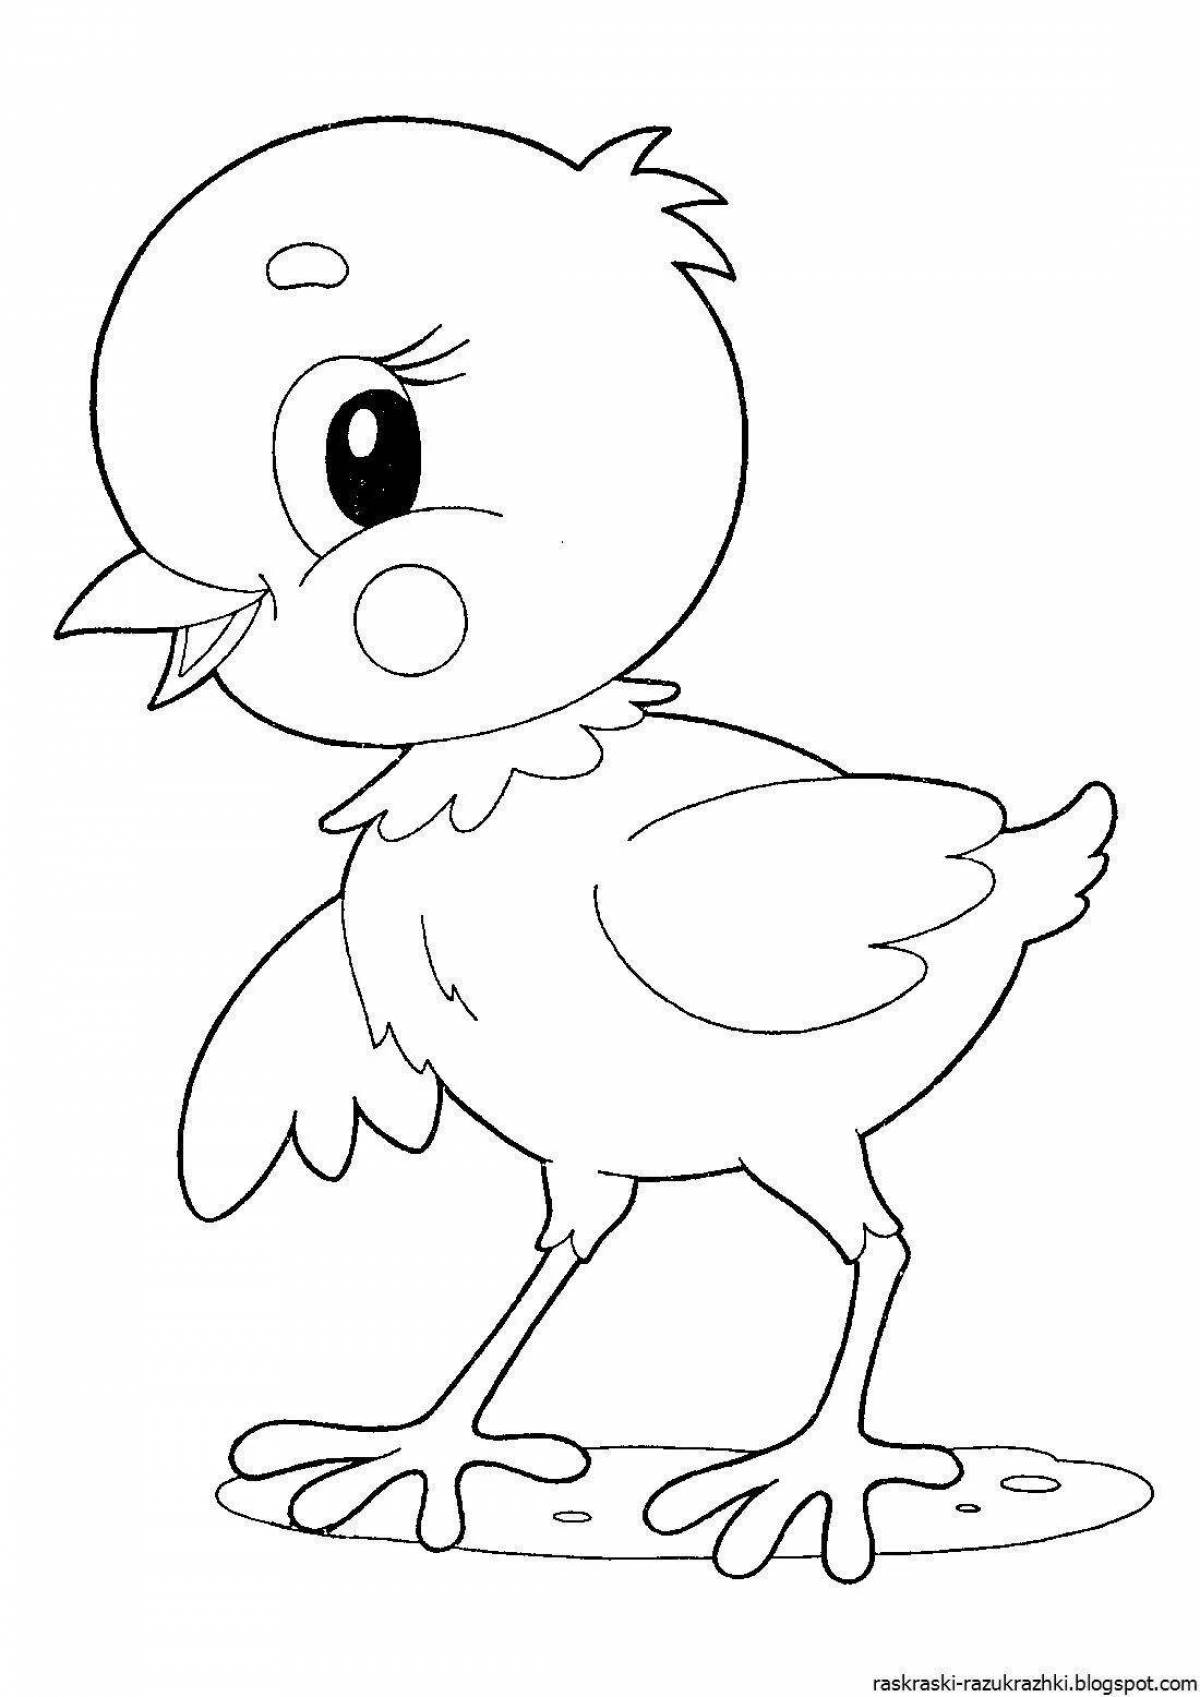 Animated drawing of a chicken for children